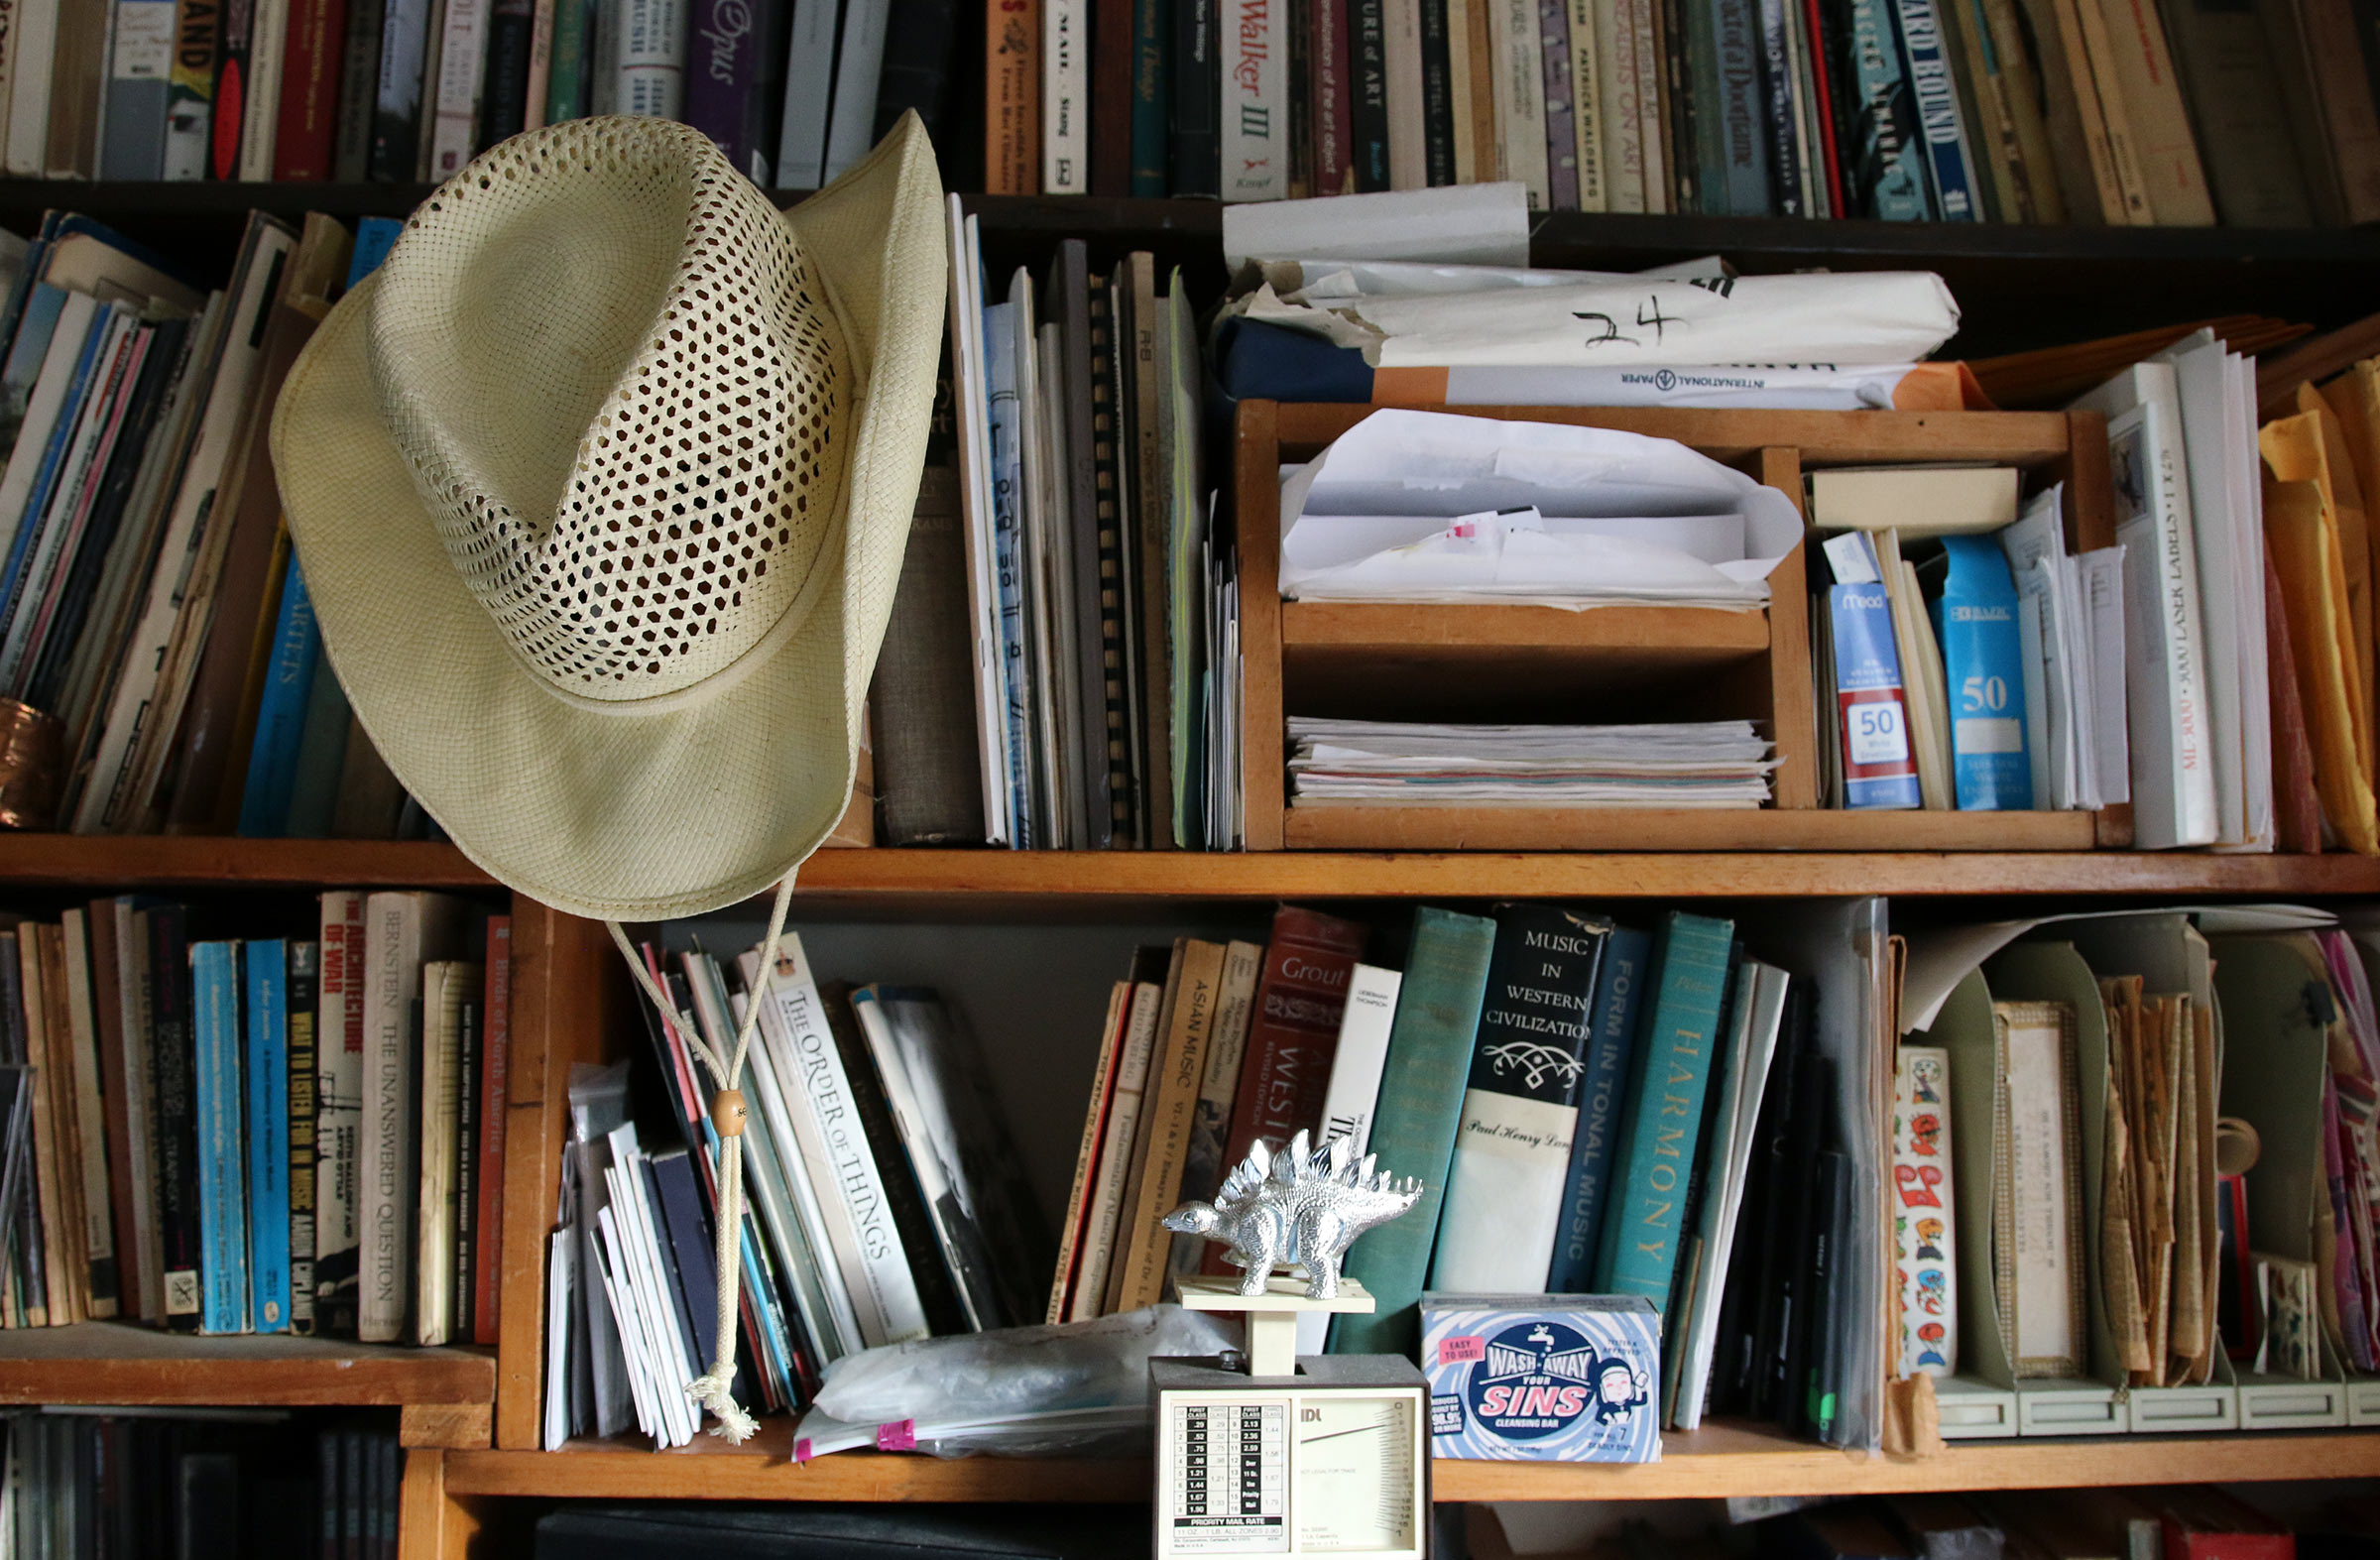 One of Scott Johnson's bookcases which also contains a hat and various knick-knacks.